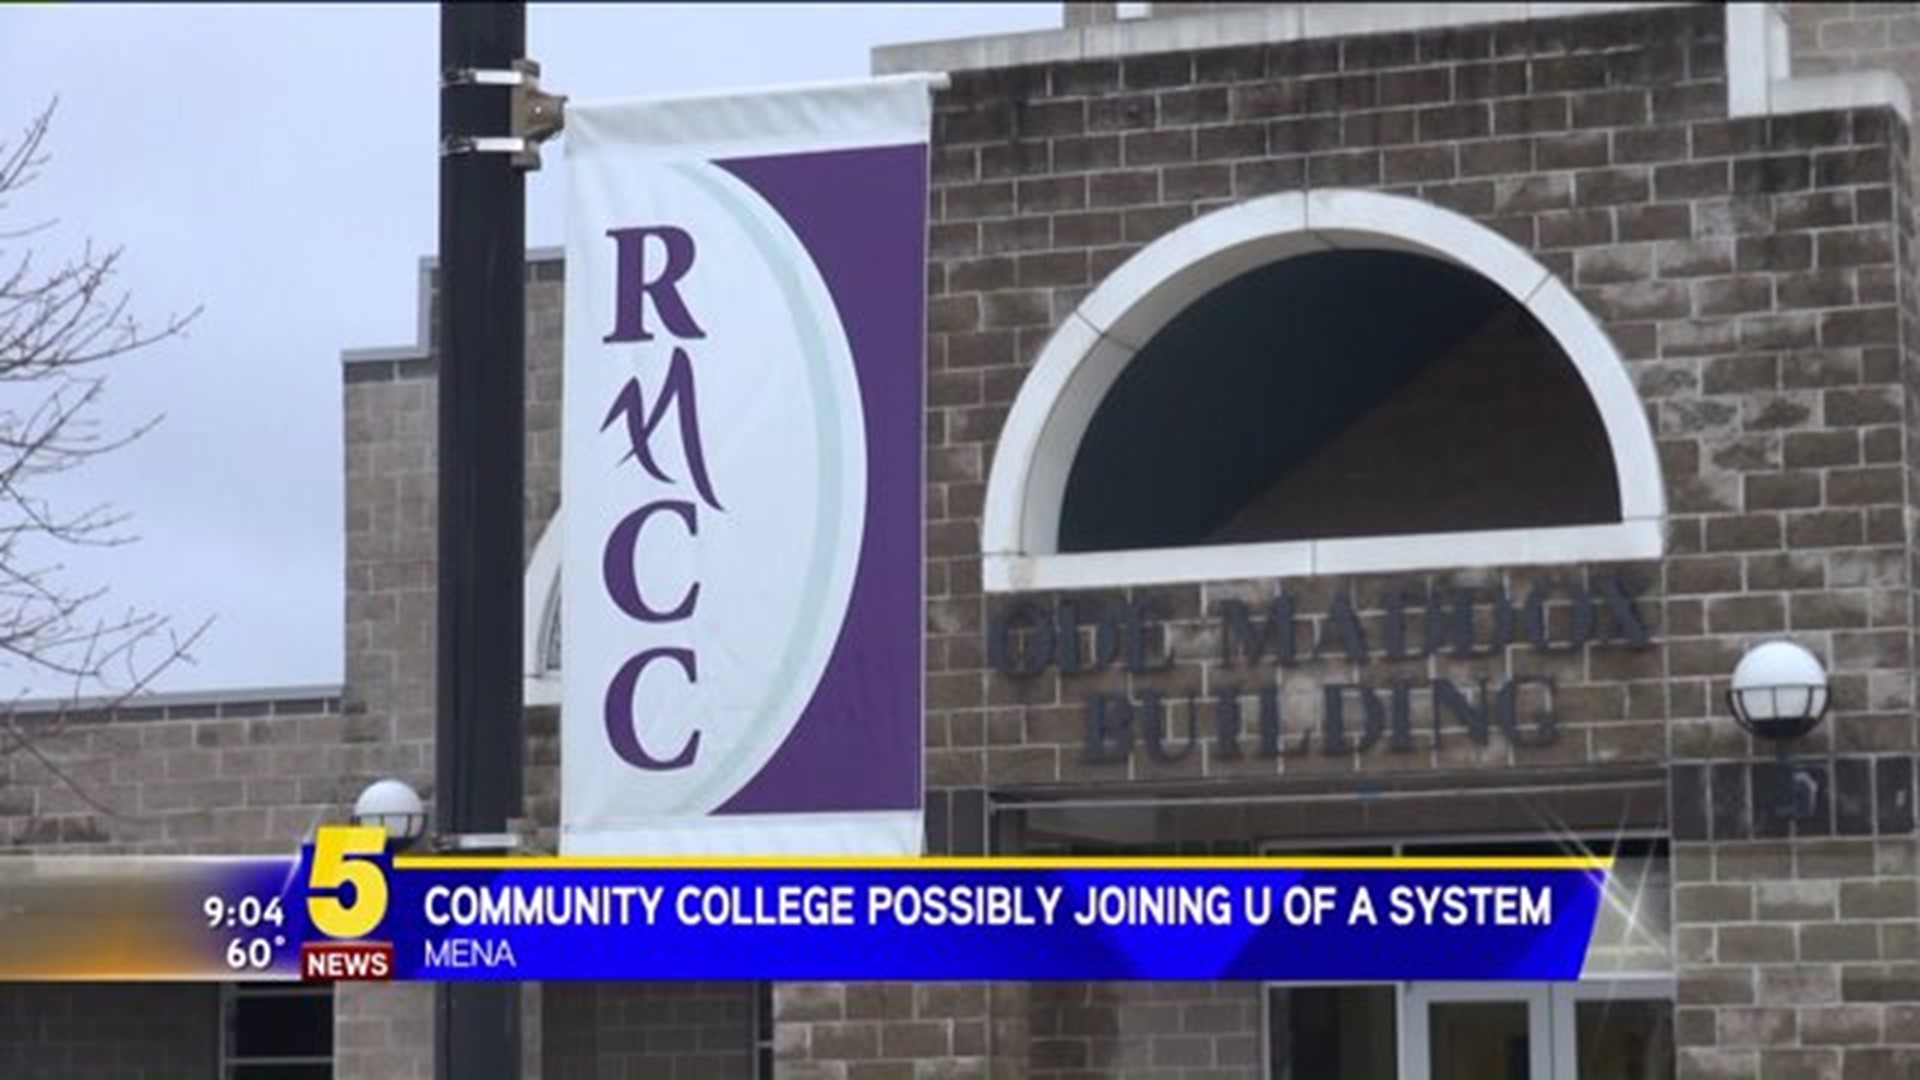 Rich Mountain Community College Merging With U Of A